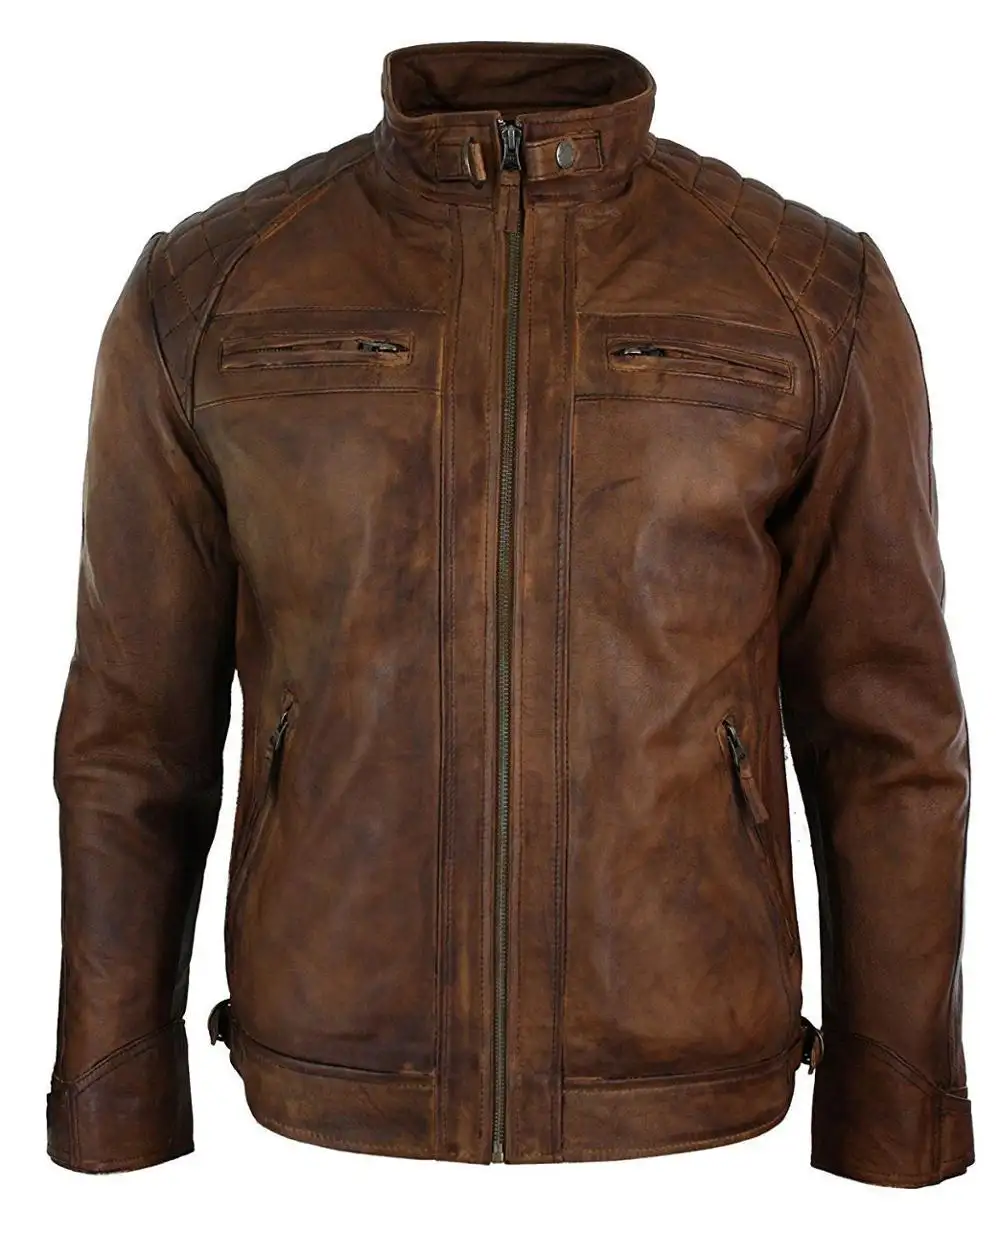 Latest Design Zipped Biker Jacket Real Leather Washed Soft Tan Brown Casual